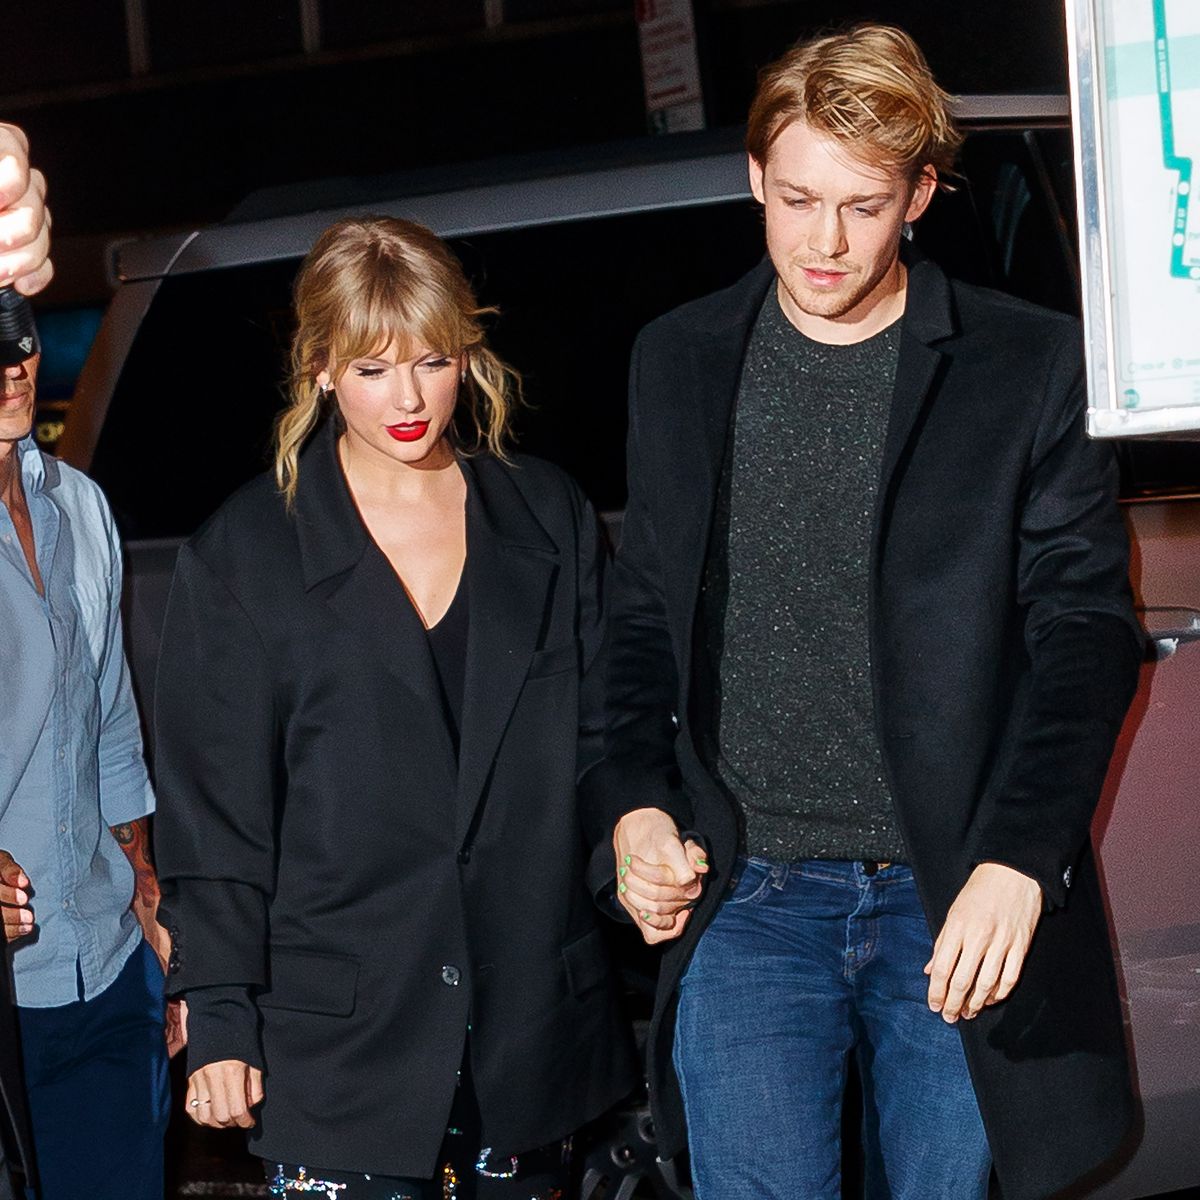 Why Taylor Swift’s breakup feels like our breakup too, according to a UF media professor